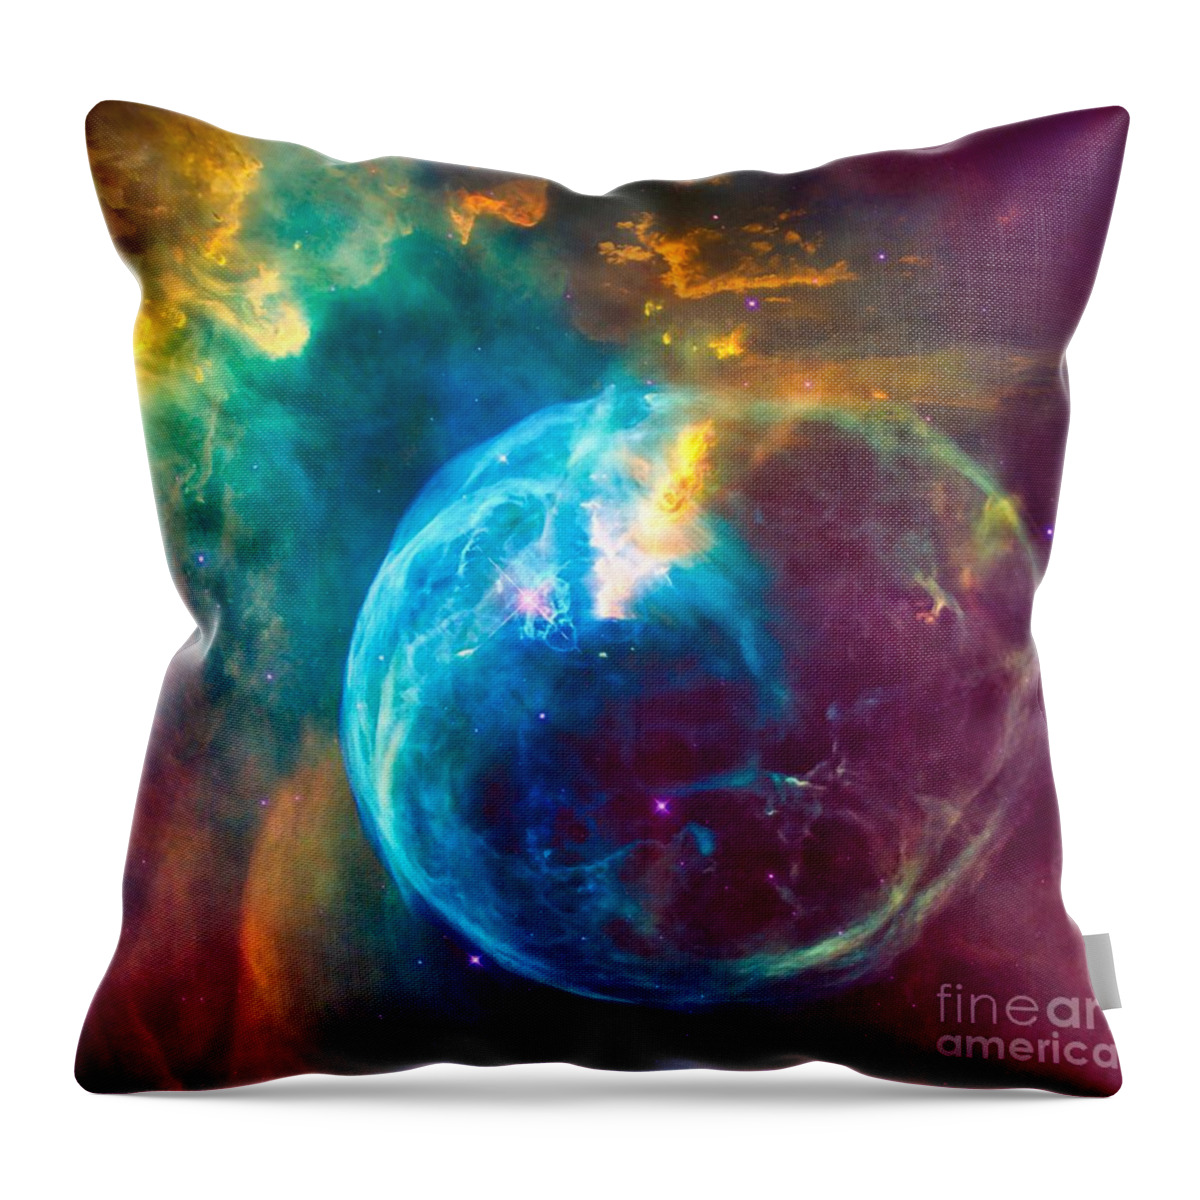 Nebula Throw Pillow featuring the photograph Colorful Wall Art Nebula by Stefano Senise